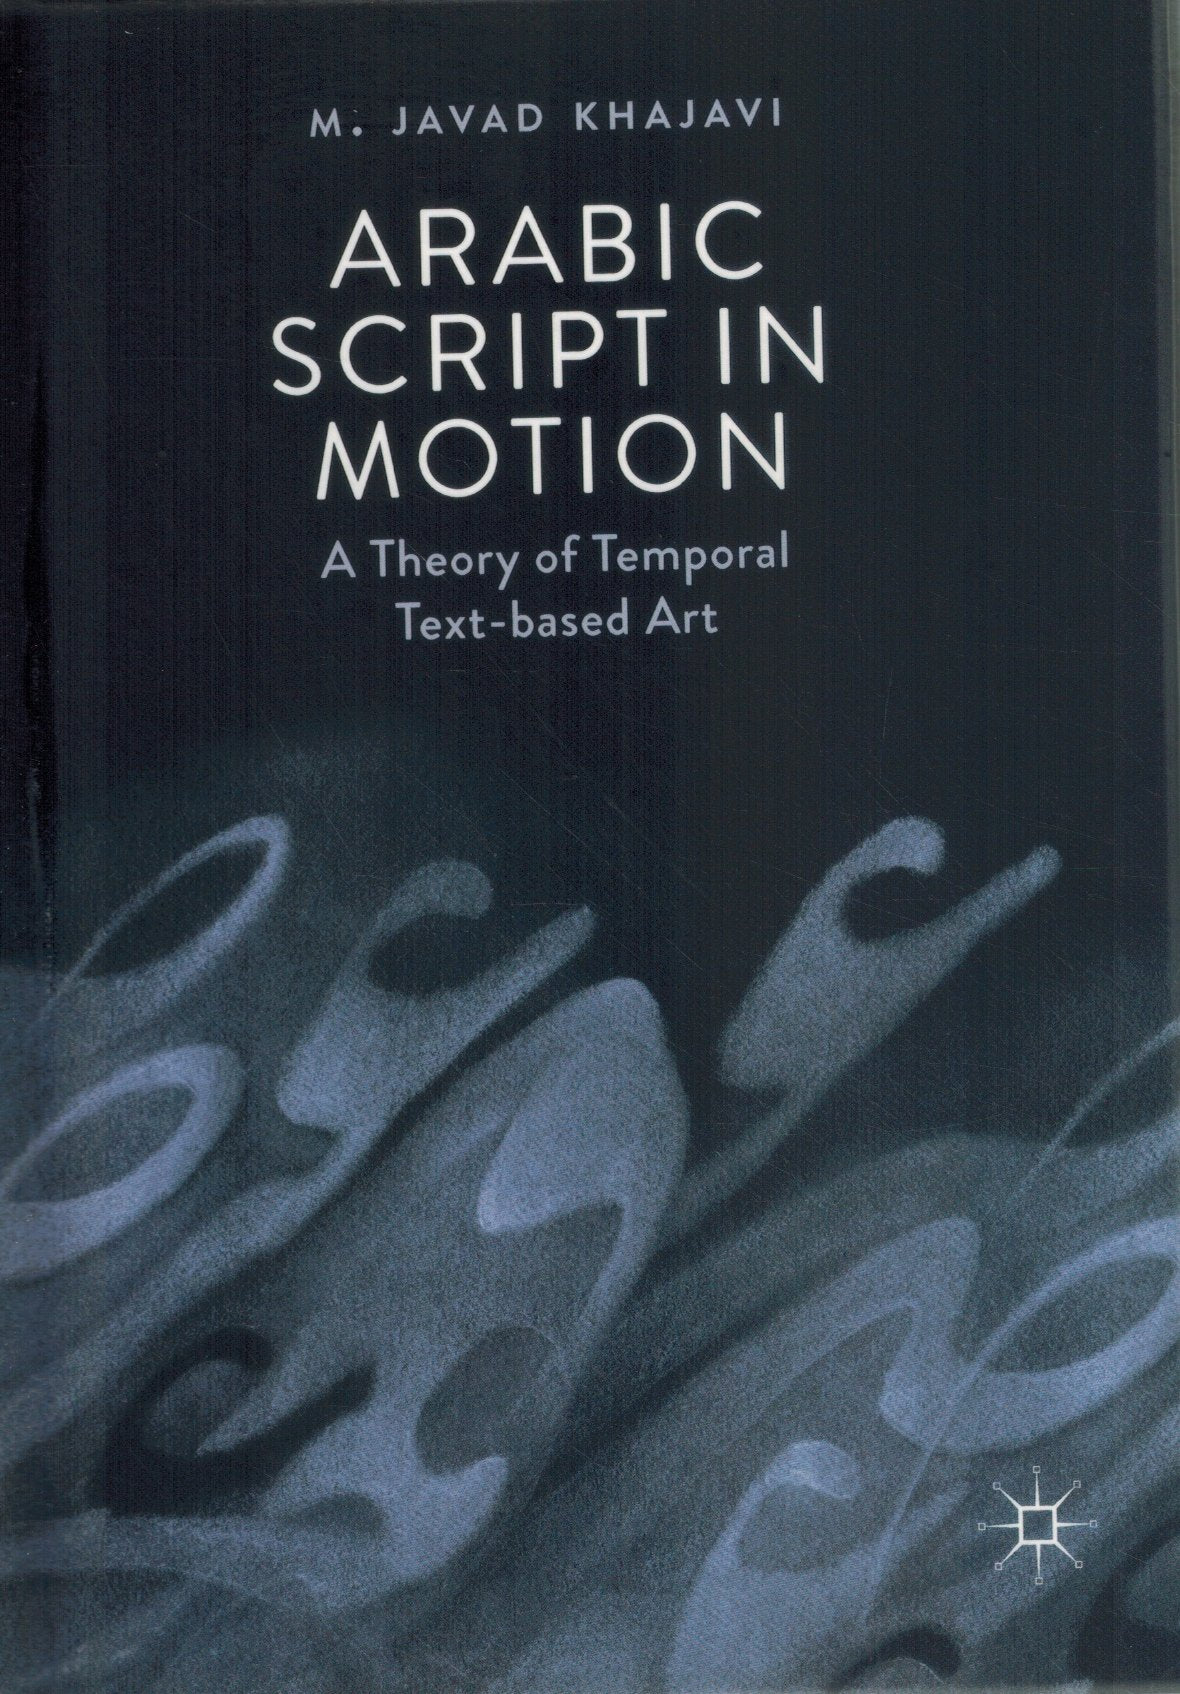 ARABIC SCRIPT IN MOTION A Theory of Temporal Text-Based Art  by Khajavi, M. Javad